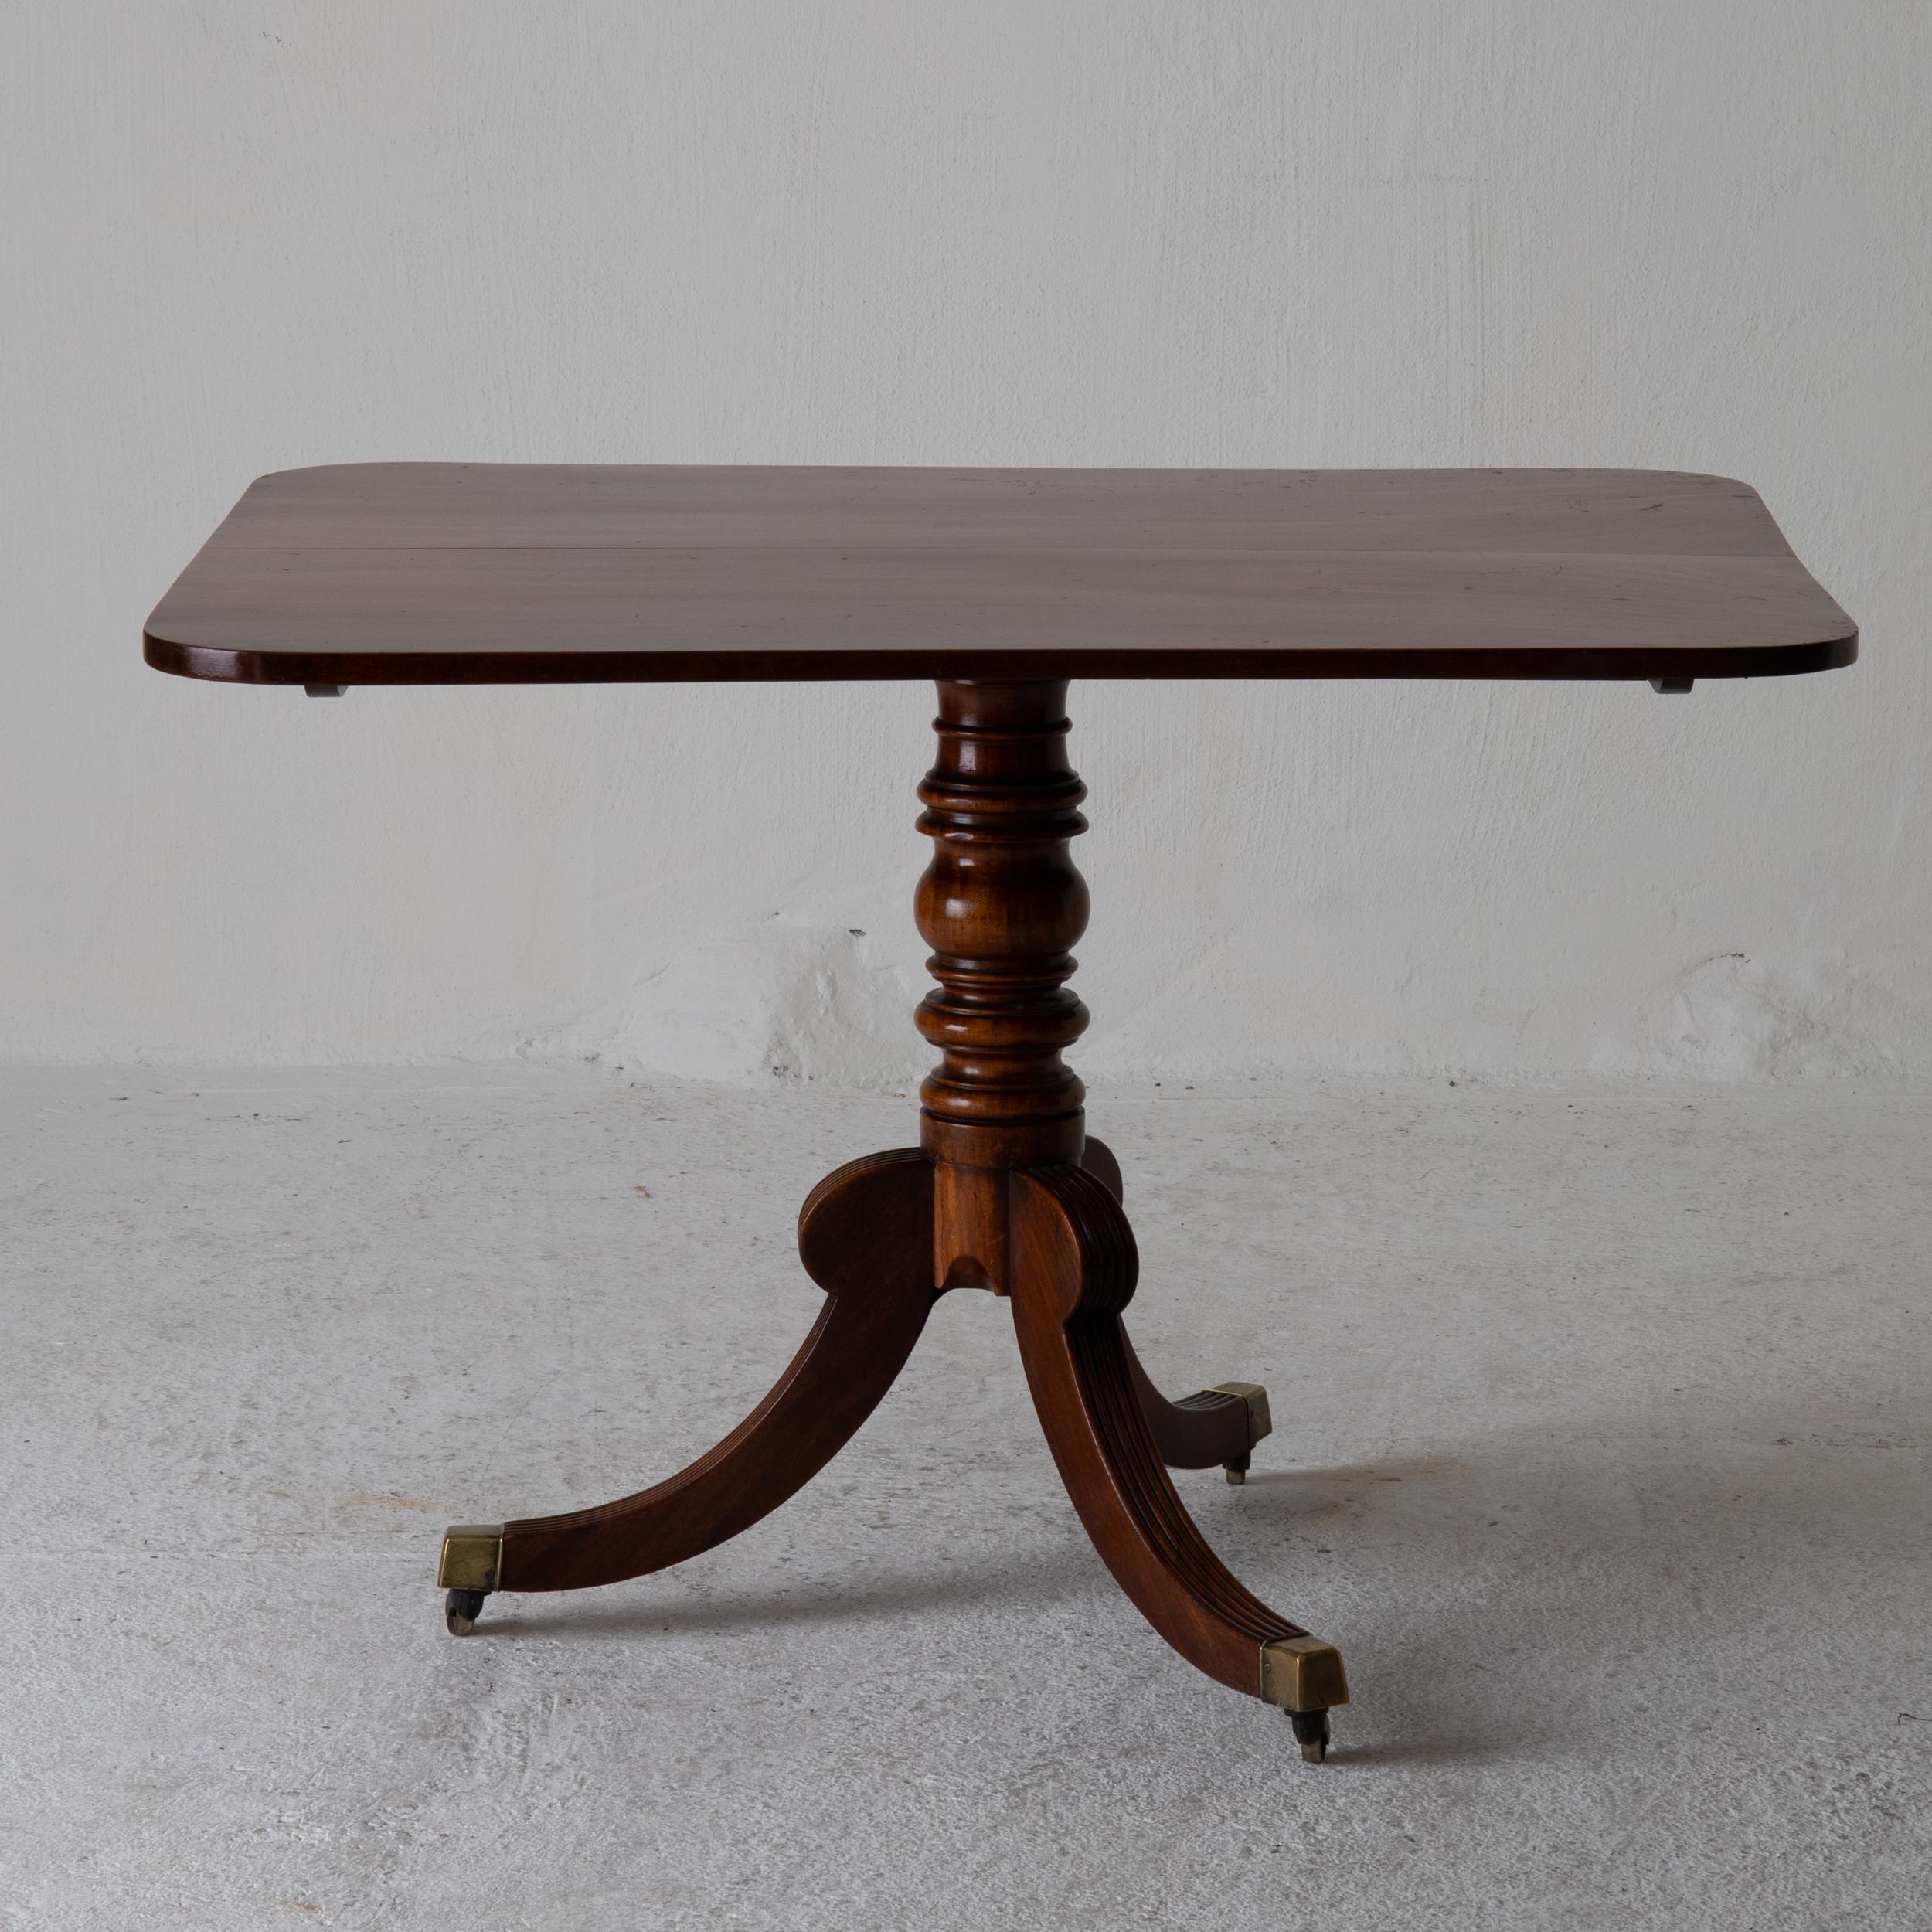 Table tilt-top English mahogany, 18th century. A table made during the Victorian period in England. Dark brown mahogany. Rectangular top with rounded corners. Tripod base ending in brass casters with wheels.